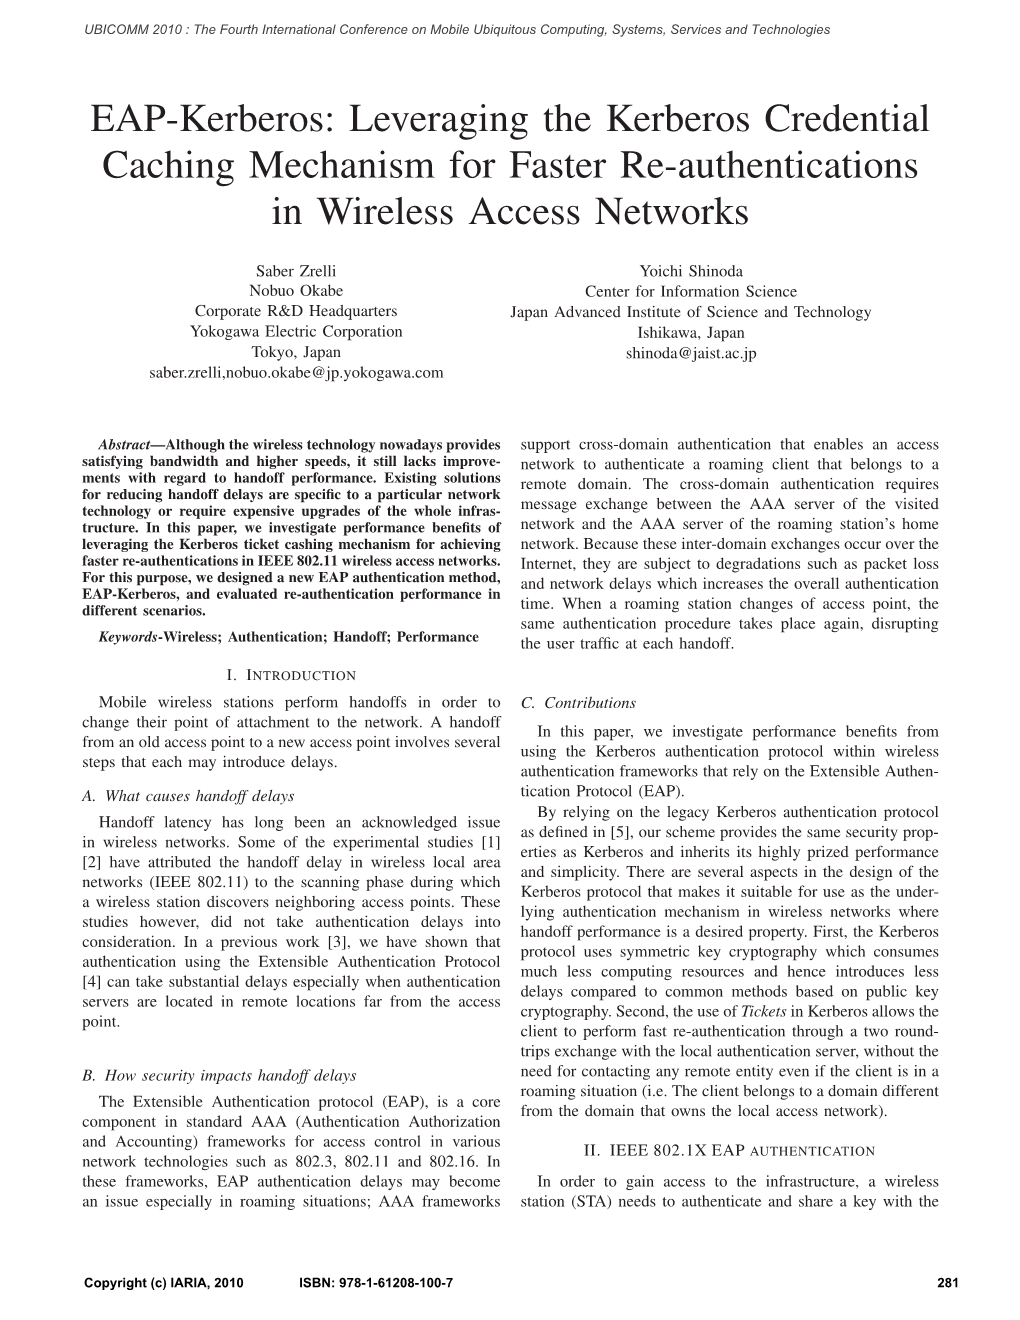 Leveraging the Kerberos Credential Caching Mechanism for Faster Re-Authentications in Wireless Access Networks